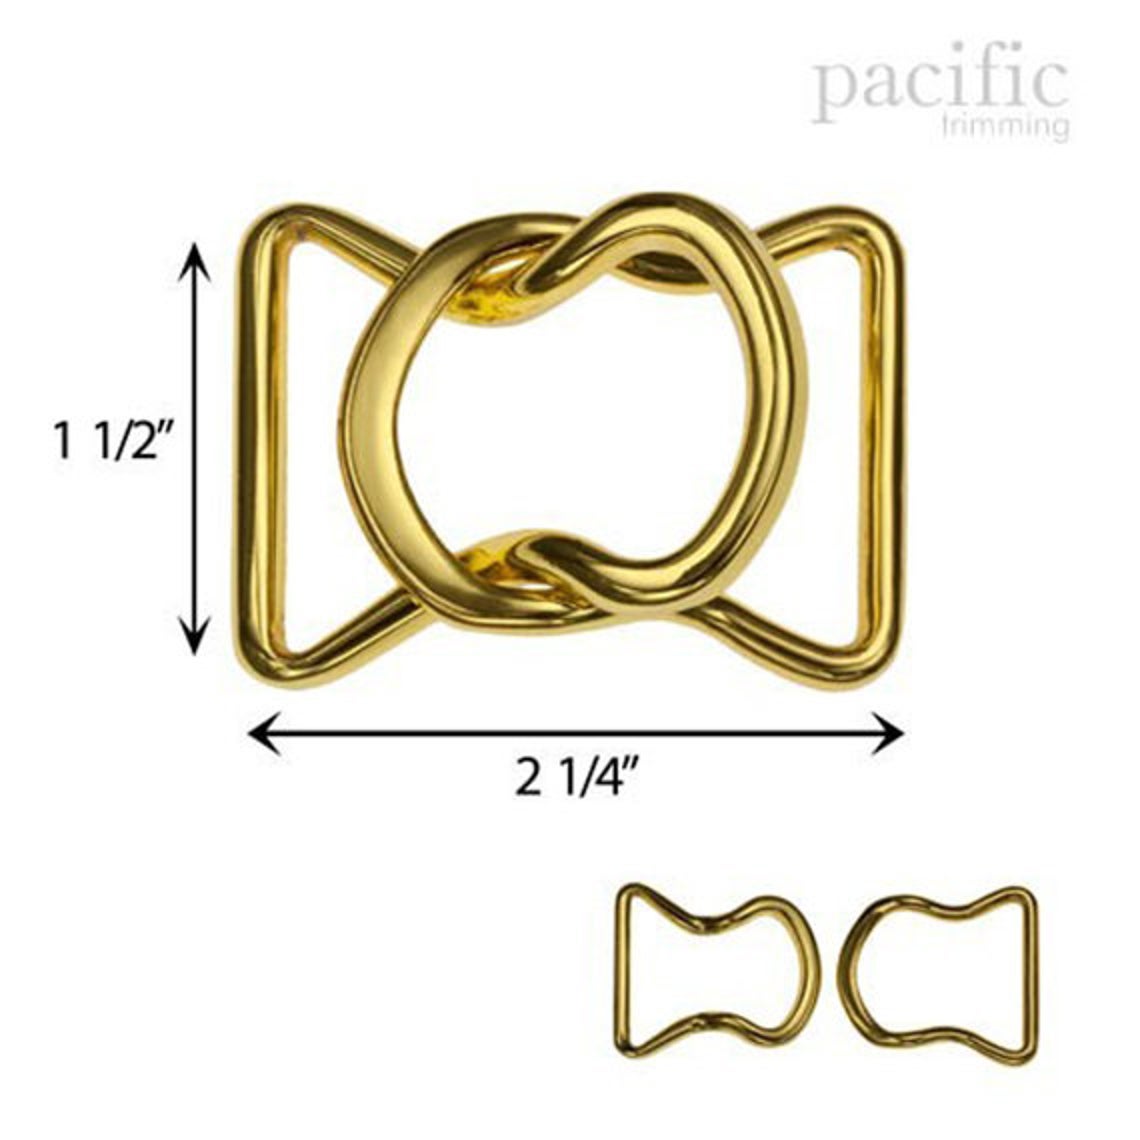 1 1/2 Front Buckle Closure 170438 – Pacific Trimming